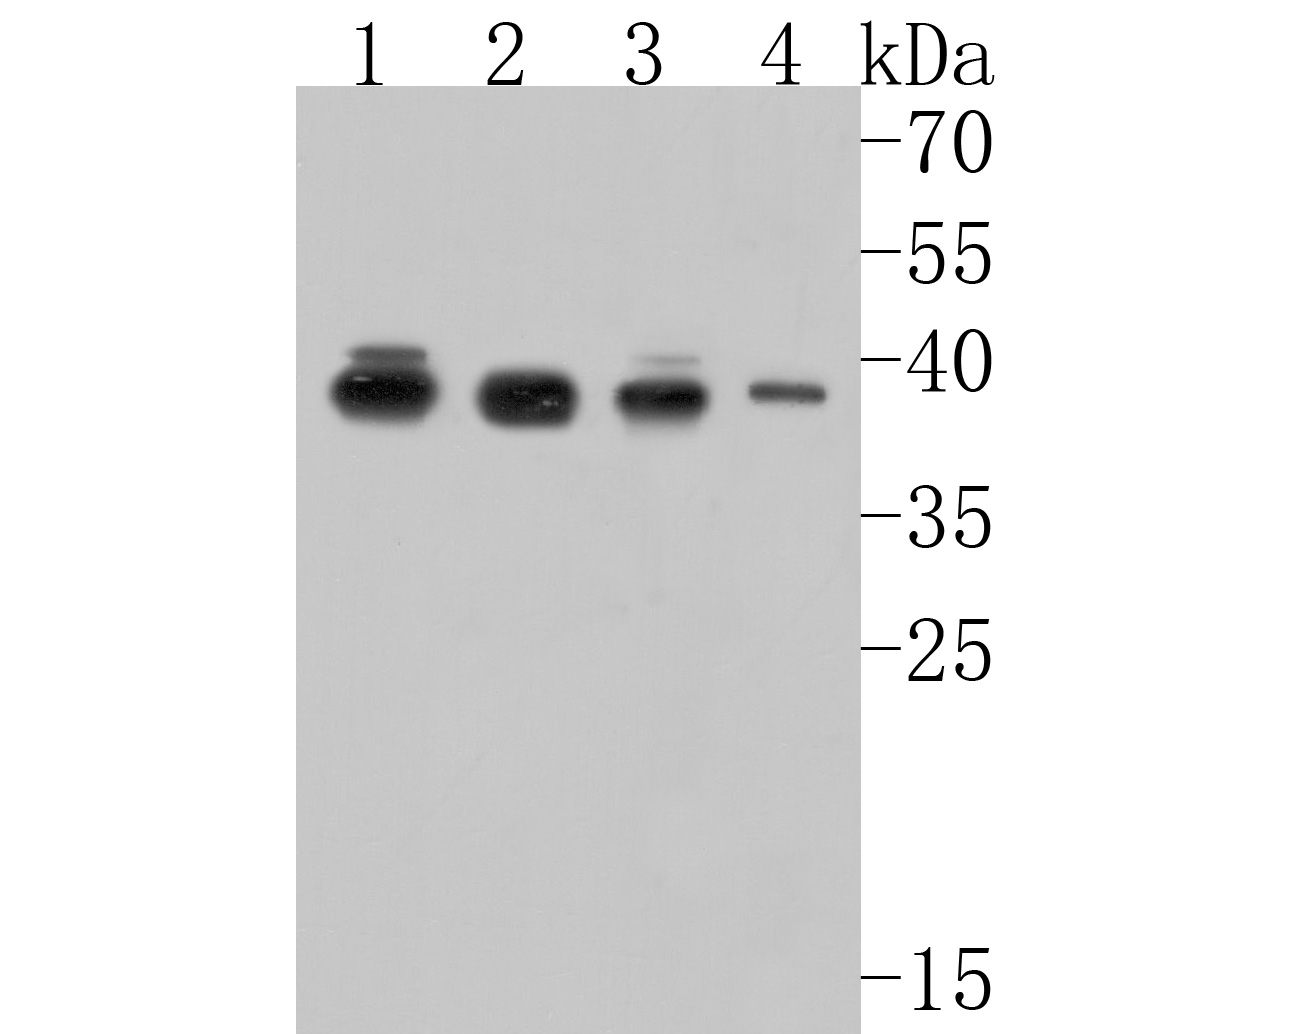 Western blot analysis of PPP2R4 on different lysates. Proteins were transferred to a PVDF membrane and blocked with 5% BSA in PBS for 1 hour at room temperature. The primary antibody (HA500123, 1/5,000) was used in 5% BSA at room temperature for 2 hours. Goat Anti-Rabbit IgG - HRP Secondary Antibody (HA1001) at 1:200,000 dilution was used for 1 hour at room temperature.<br />
Positive control: <br />
Lane 1: MCF-7 cell lysate<br />
Lane 2: SK-Br-3 cell lysate<br />
Lane 3: SiHa cell lysate<br />
Lane 4: Mouse brain tissue lysate